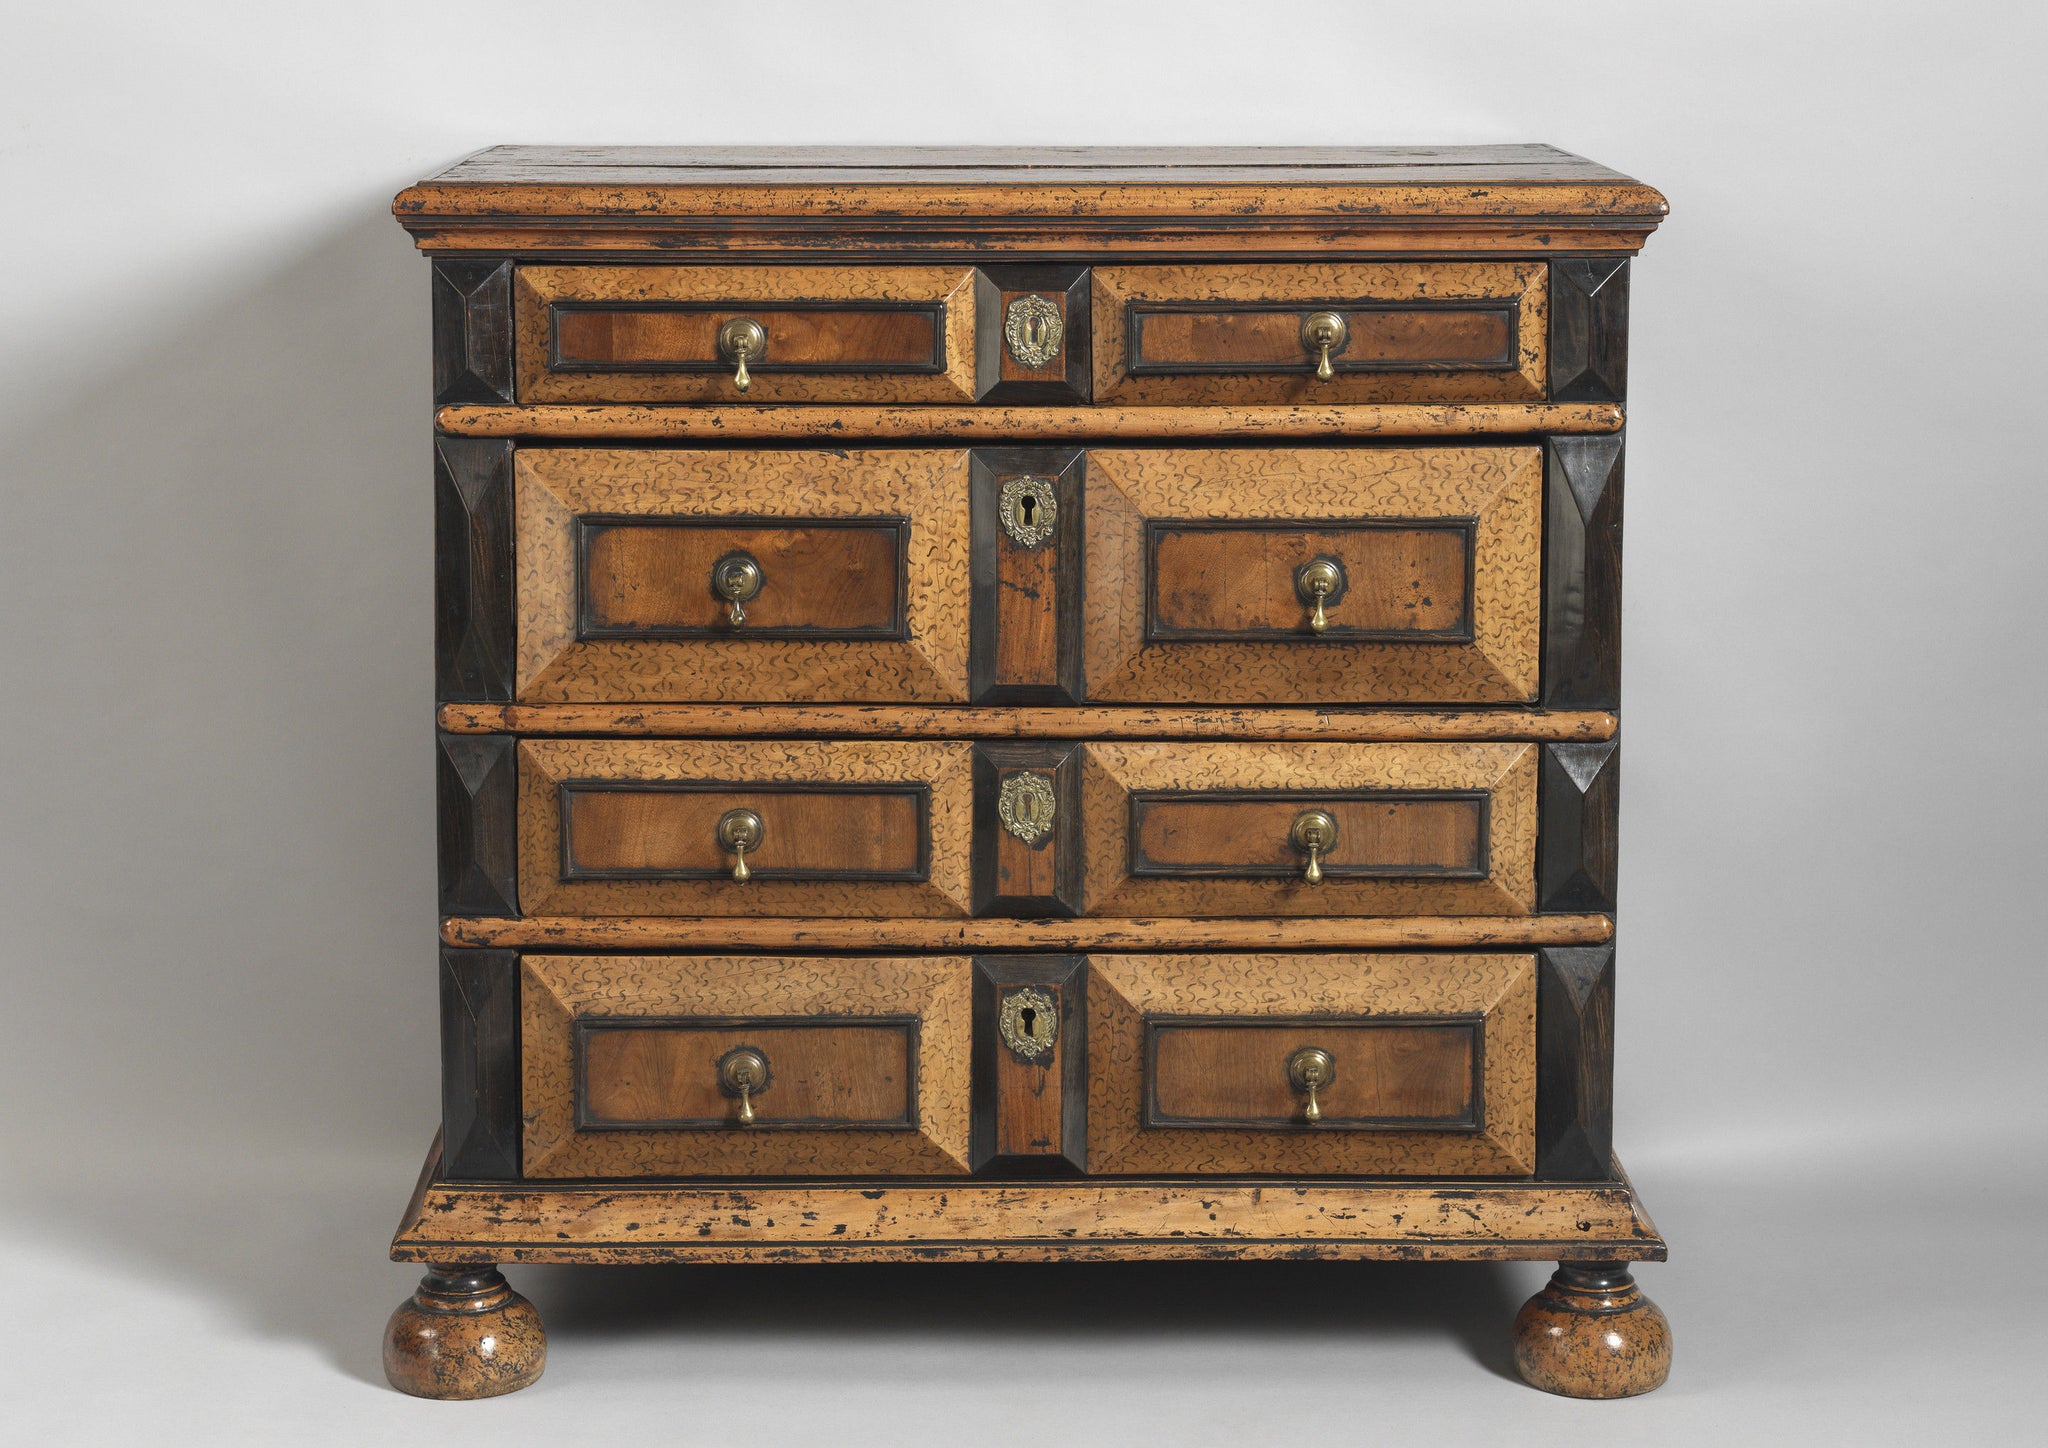 A Unique and Significant William and Mary Period Chest of Four Drawers